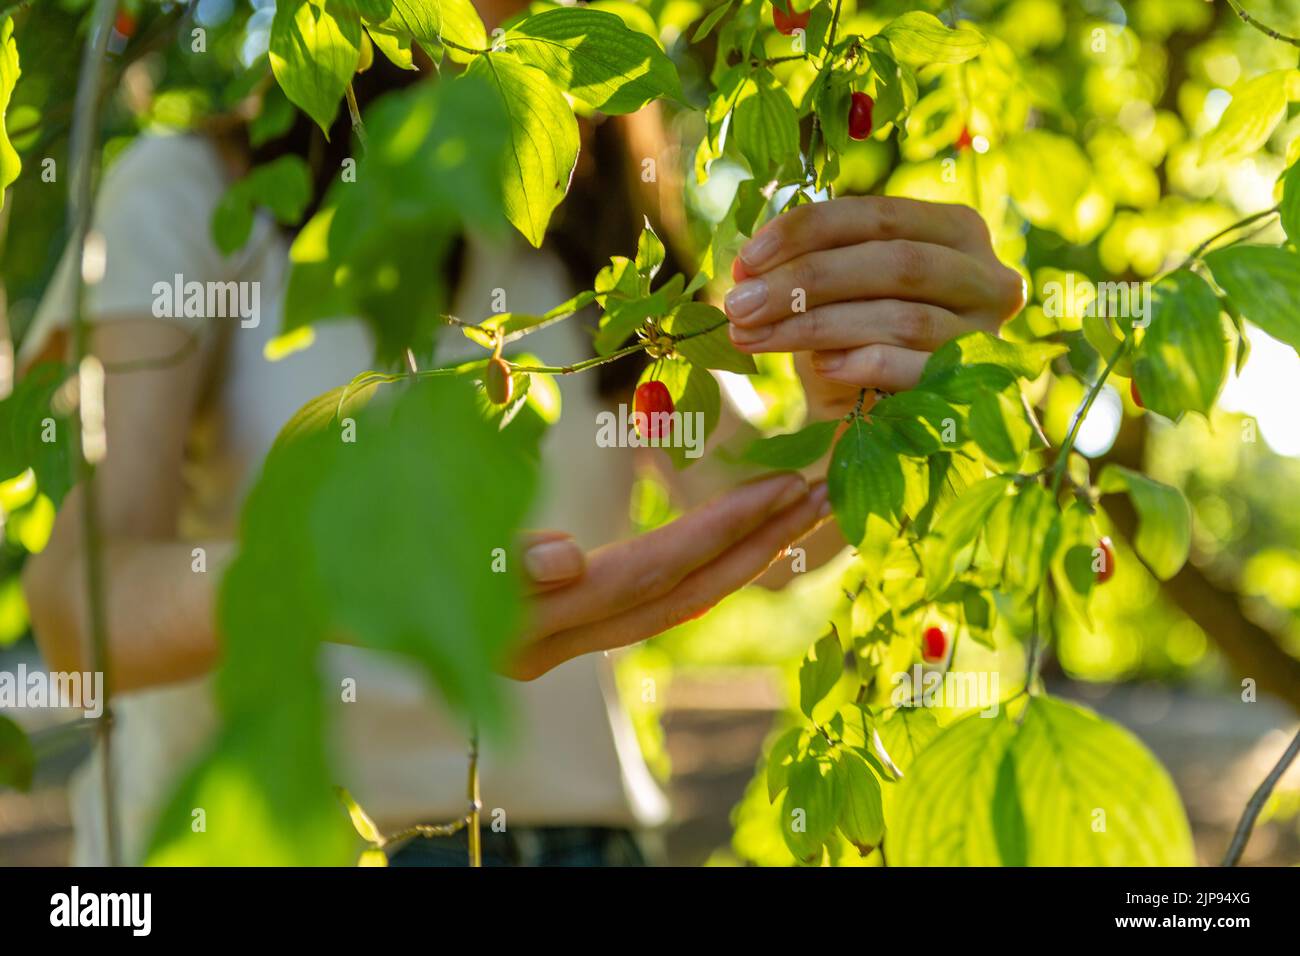 Picking up red dogwood berries from the green bush. Stock Photo